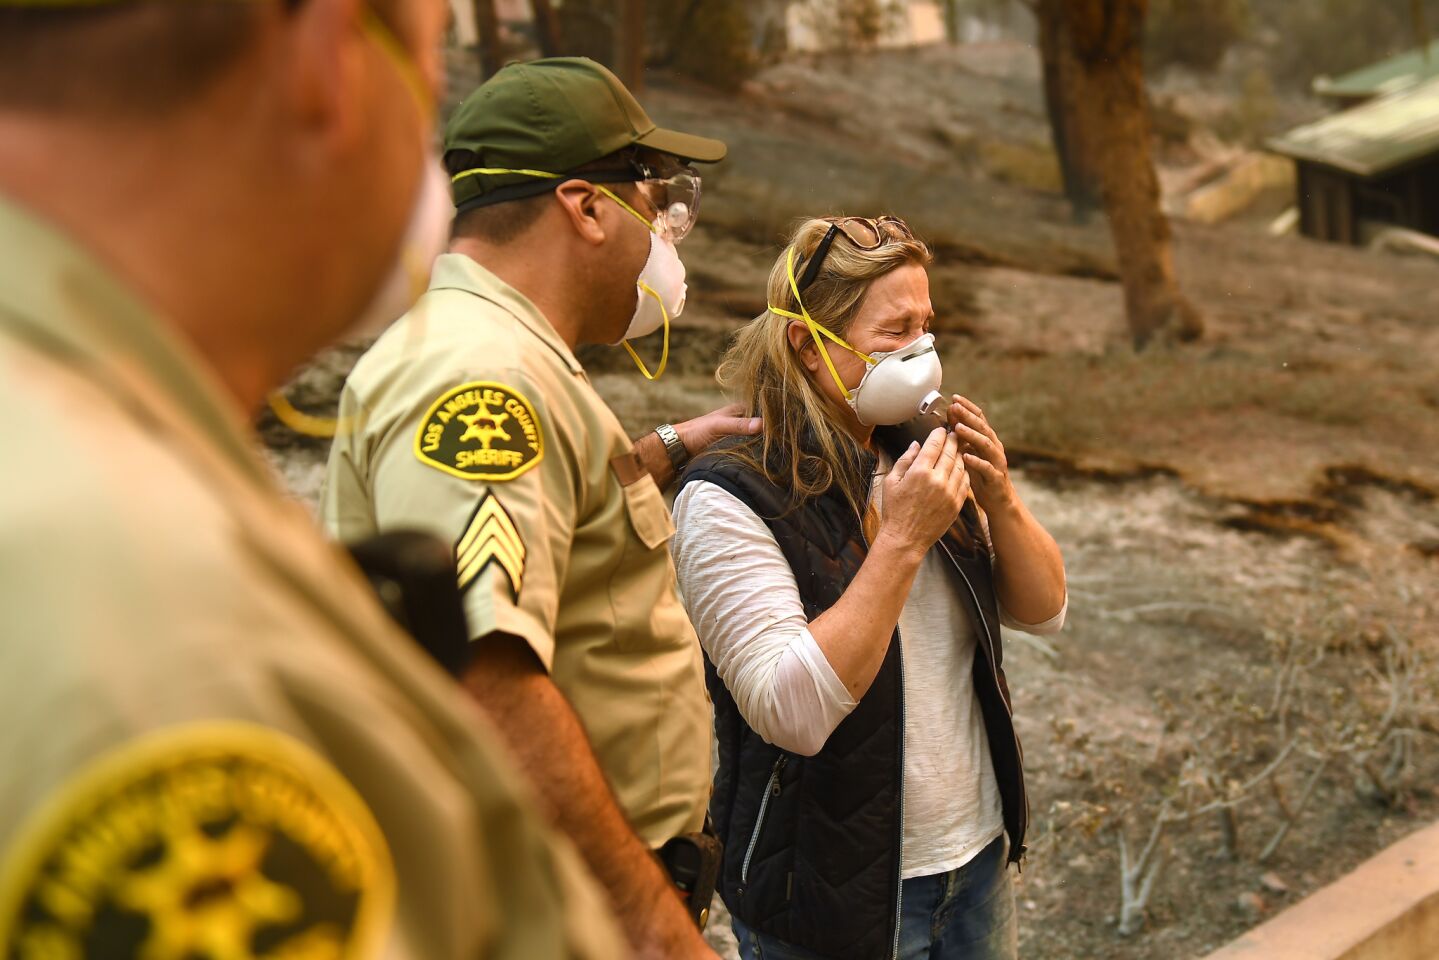 Anne Marie Mueller is notified by L.A. County Sheriff's Officer Ernie Ferreras that her friends in Malibu are safe.